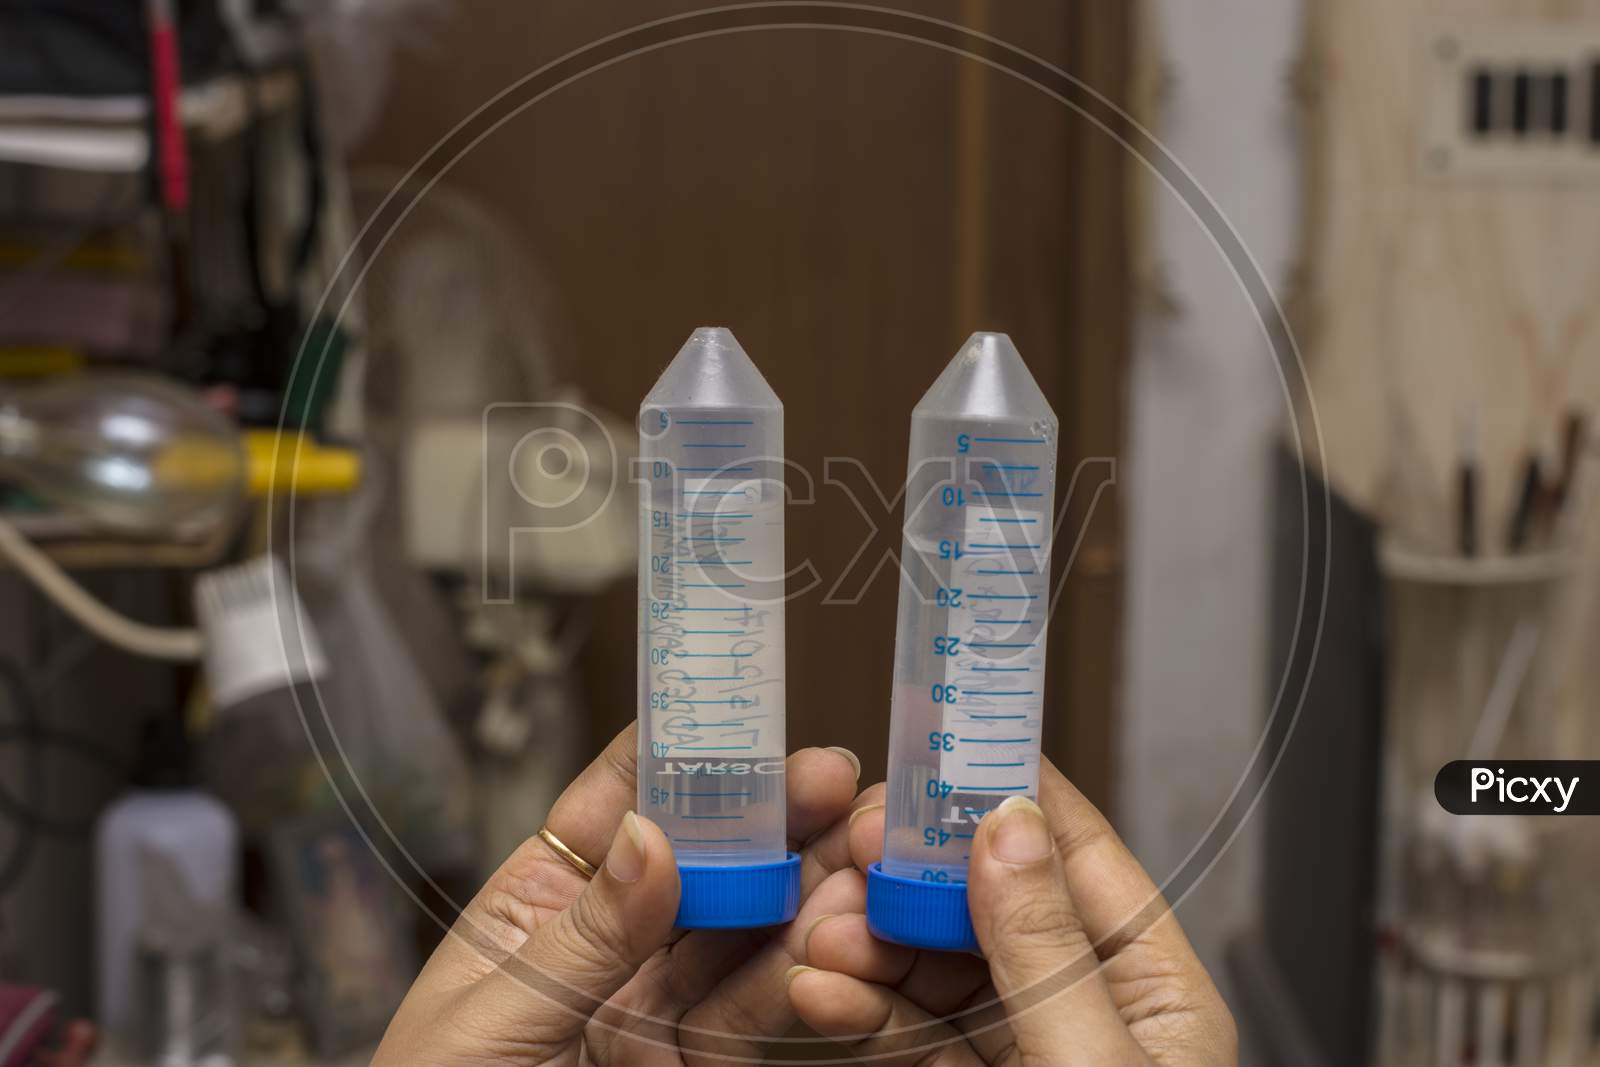 Two Test Tubes For Laboratory Testing Bacteria And Fungus.